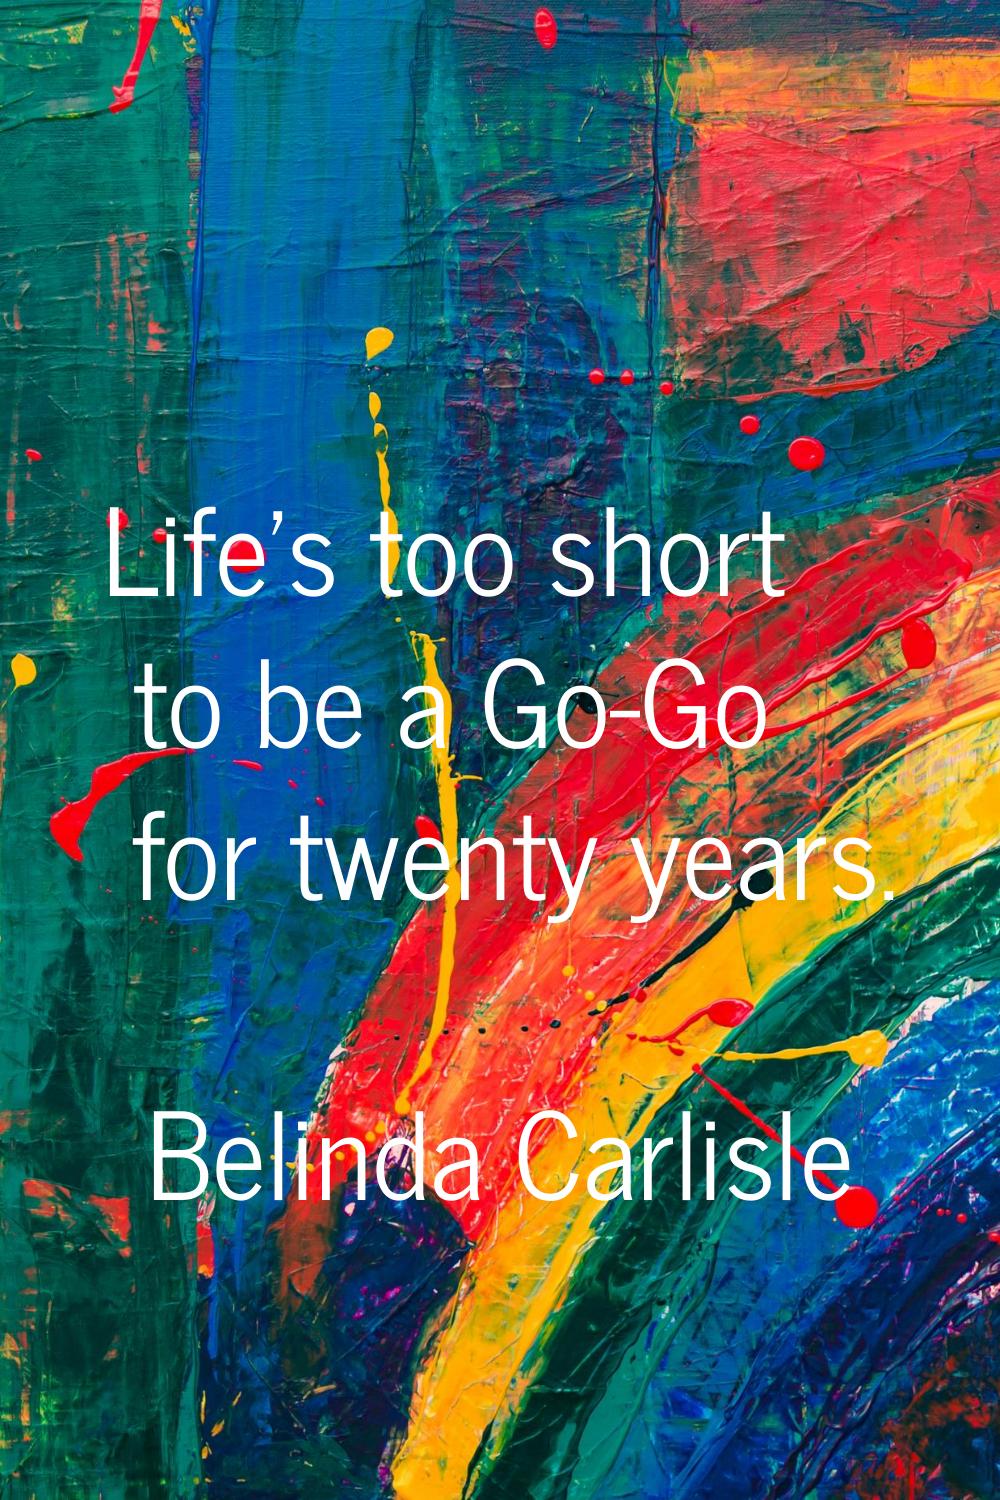 Life's too short to be a Go-Go for twenty years.